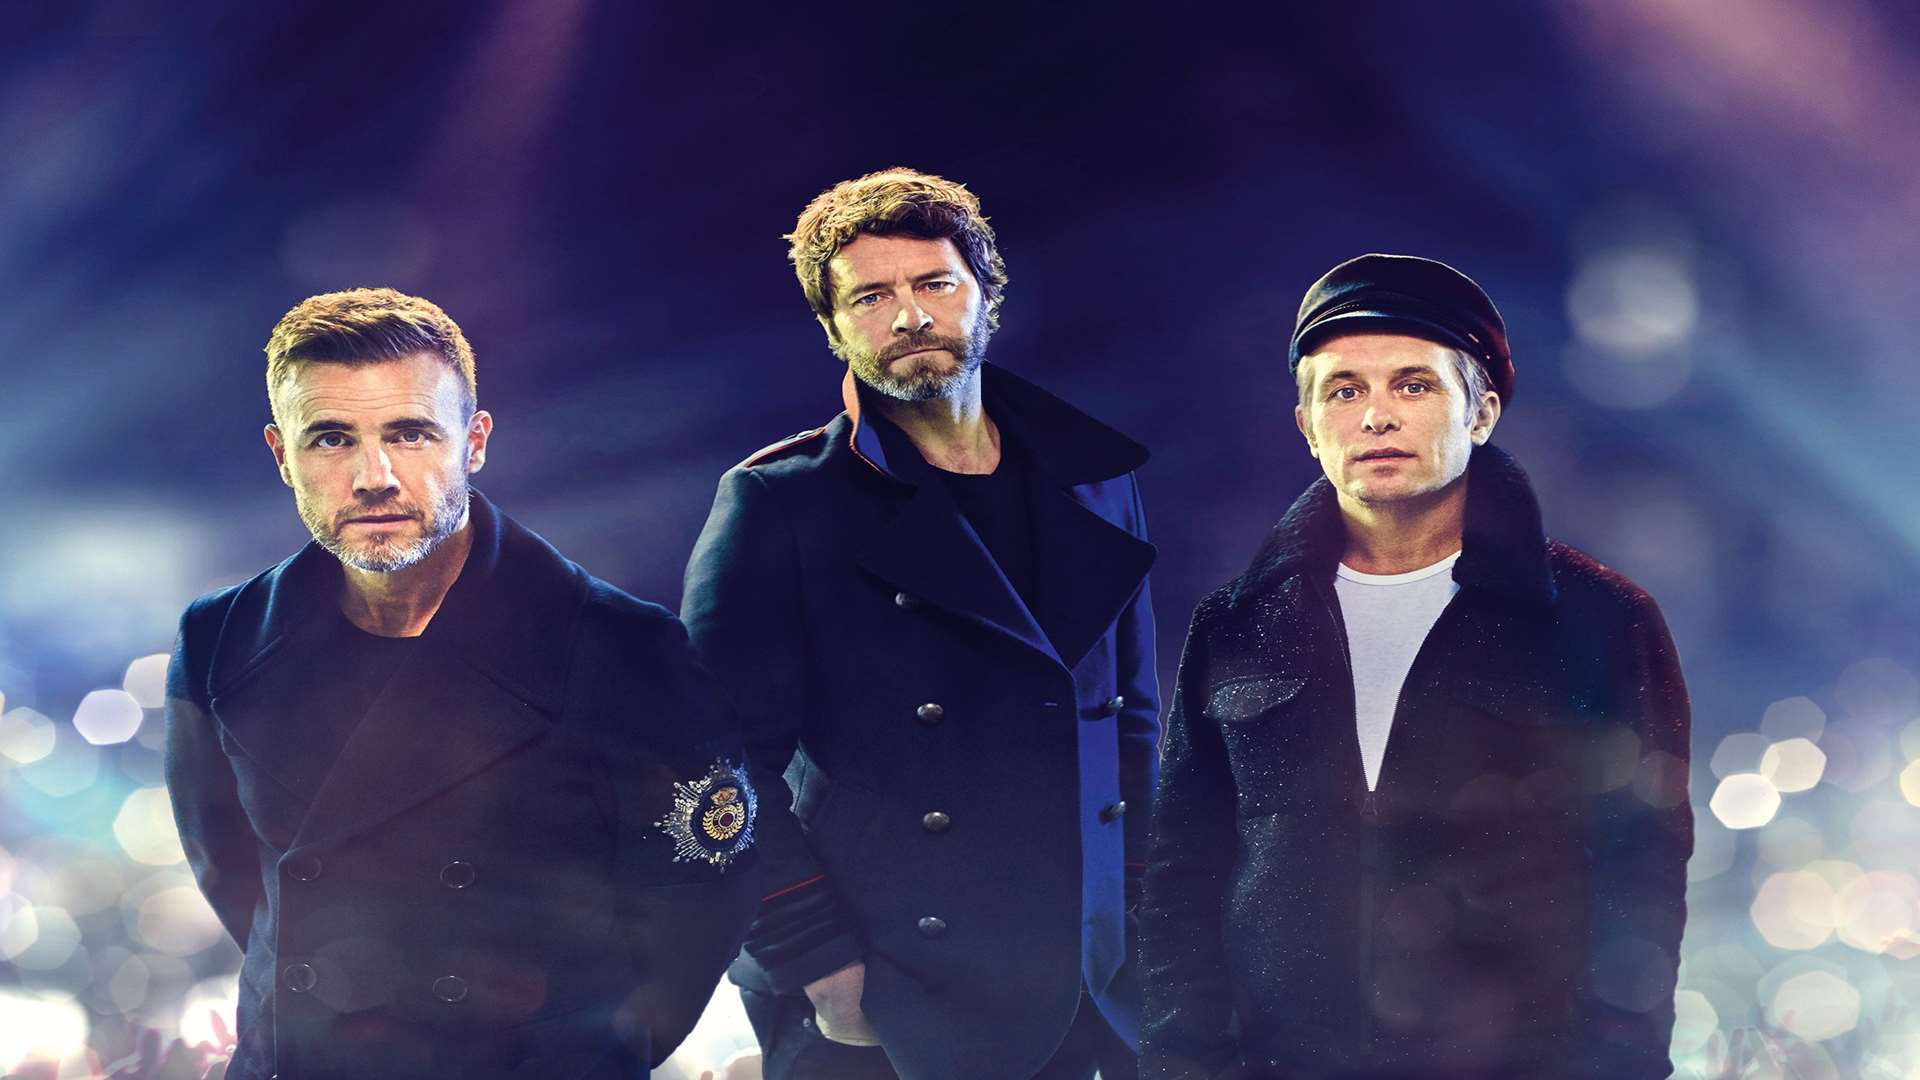 Take That: Wonderland Live will be at Bluewater's Showcase cinema live